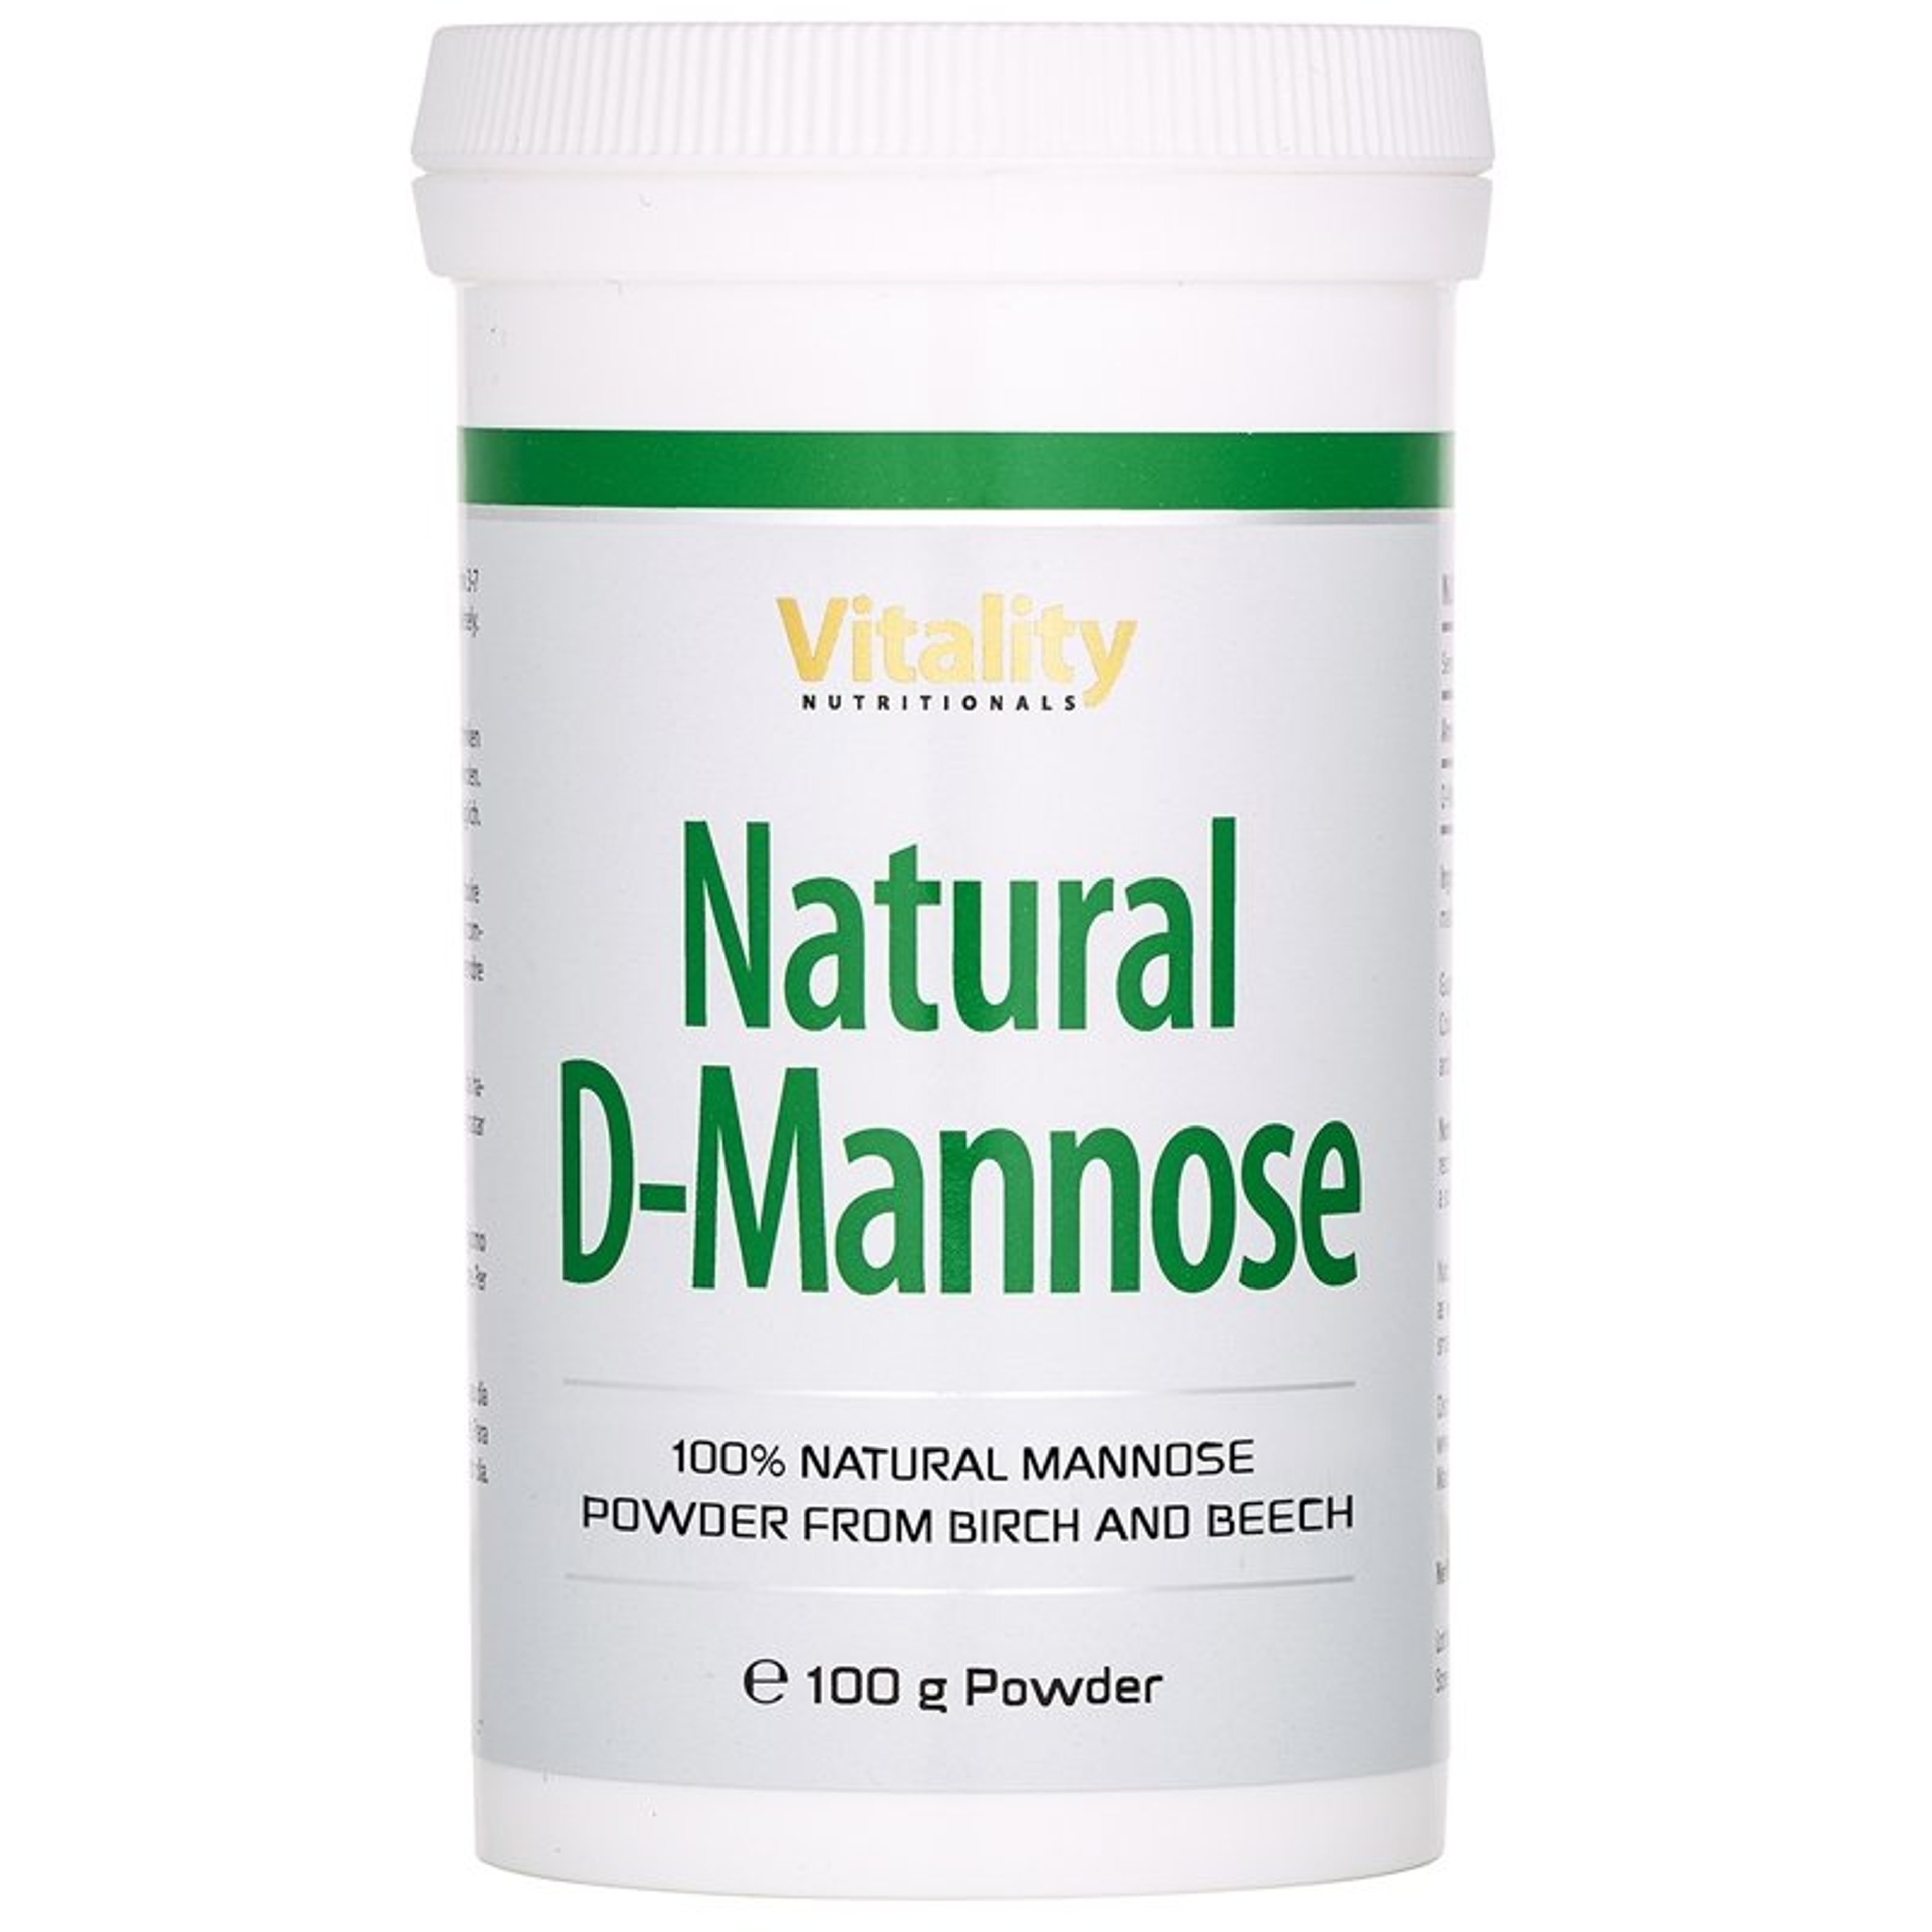 vitality-nutritionals-natural-d-mannose_2.jpg